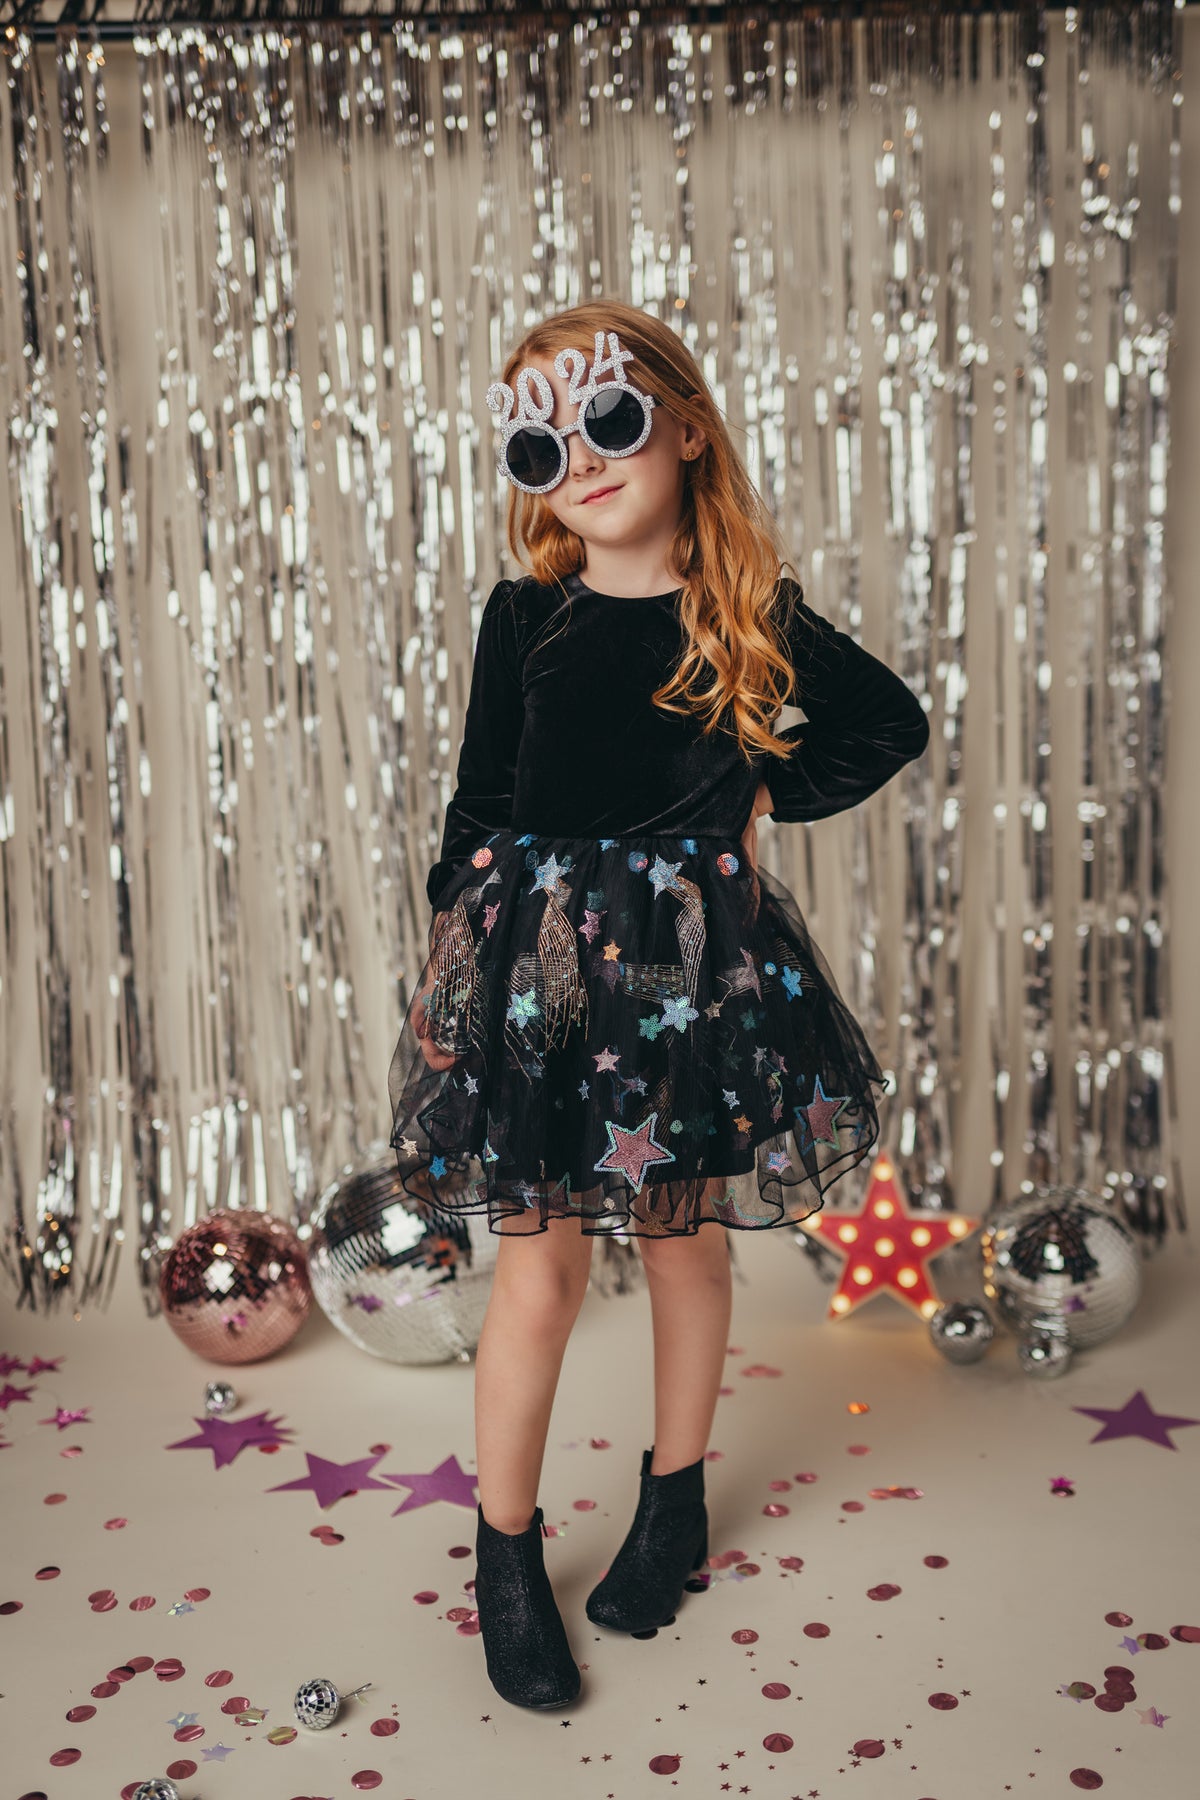 Stardust Dress and Bloomer Set